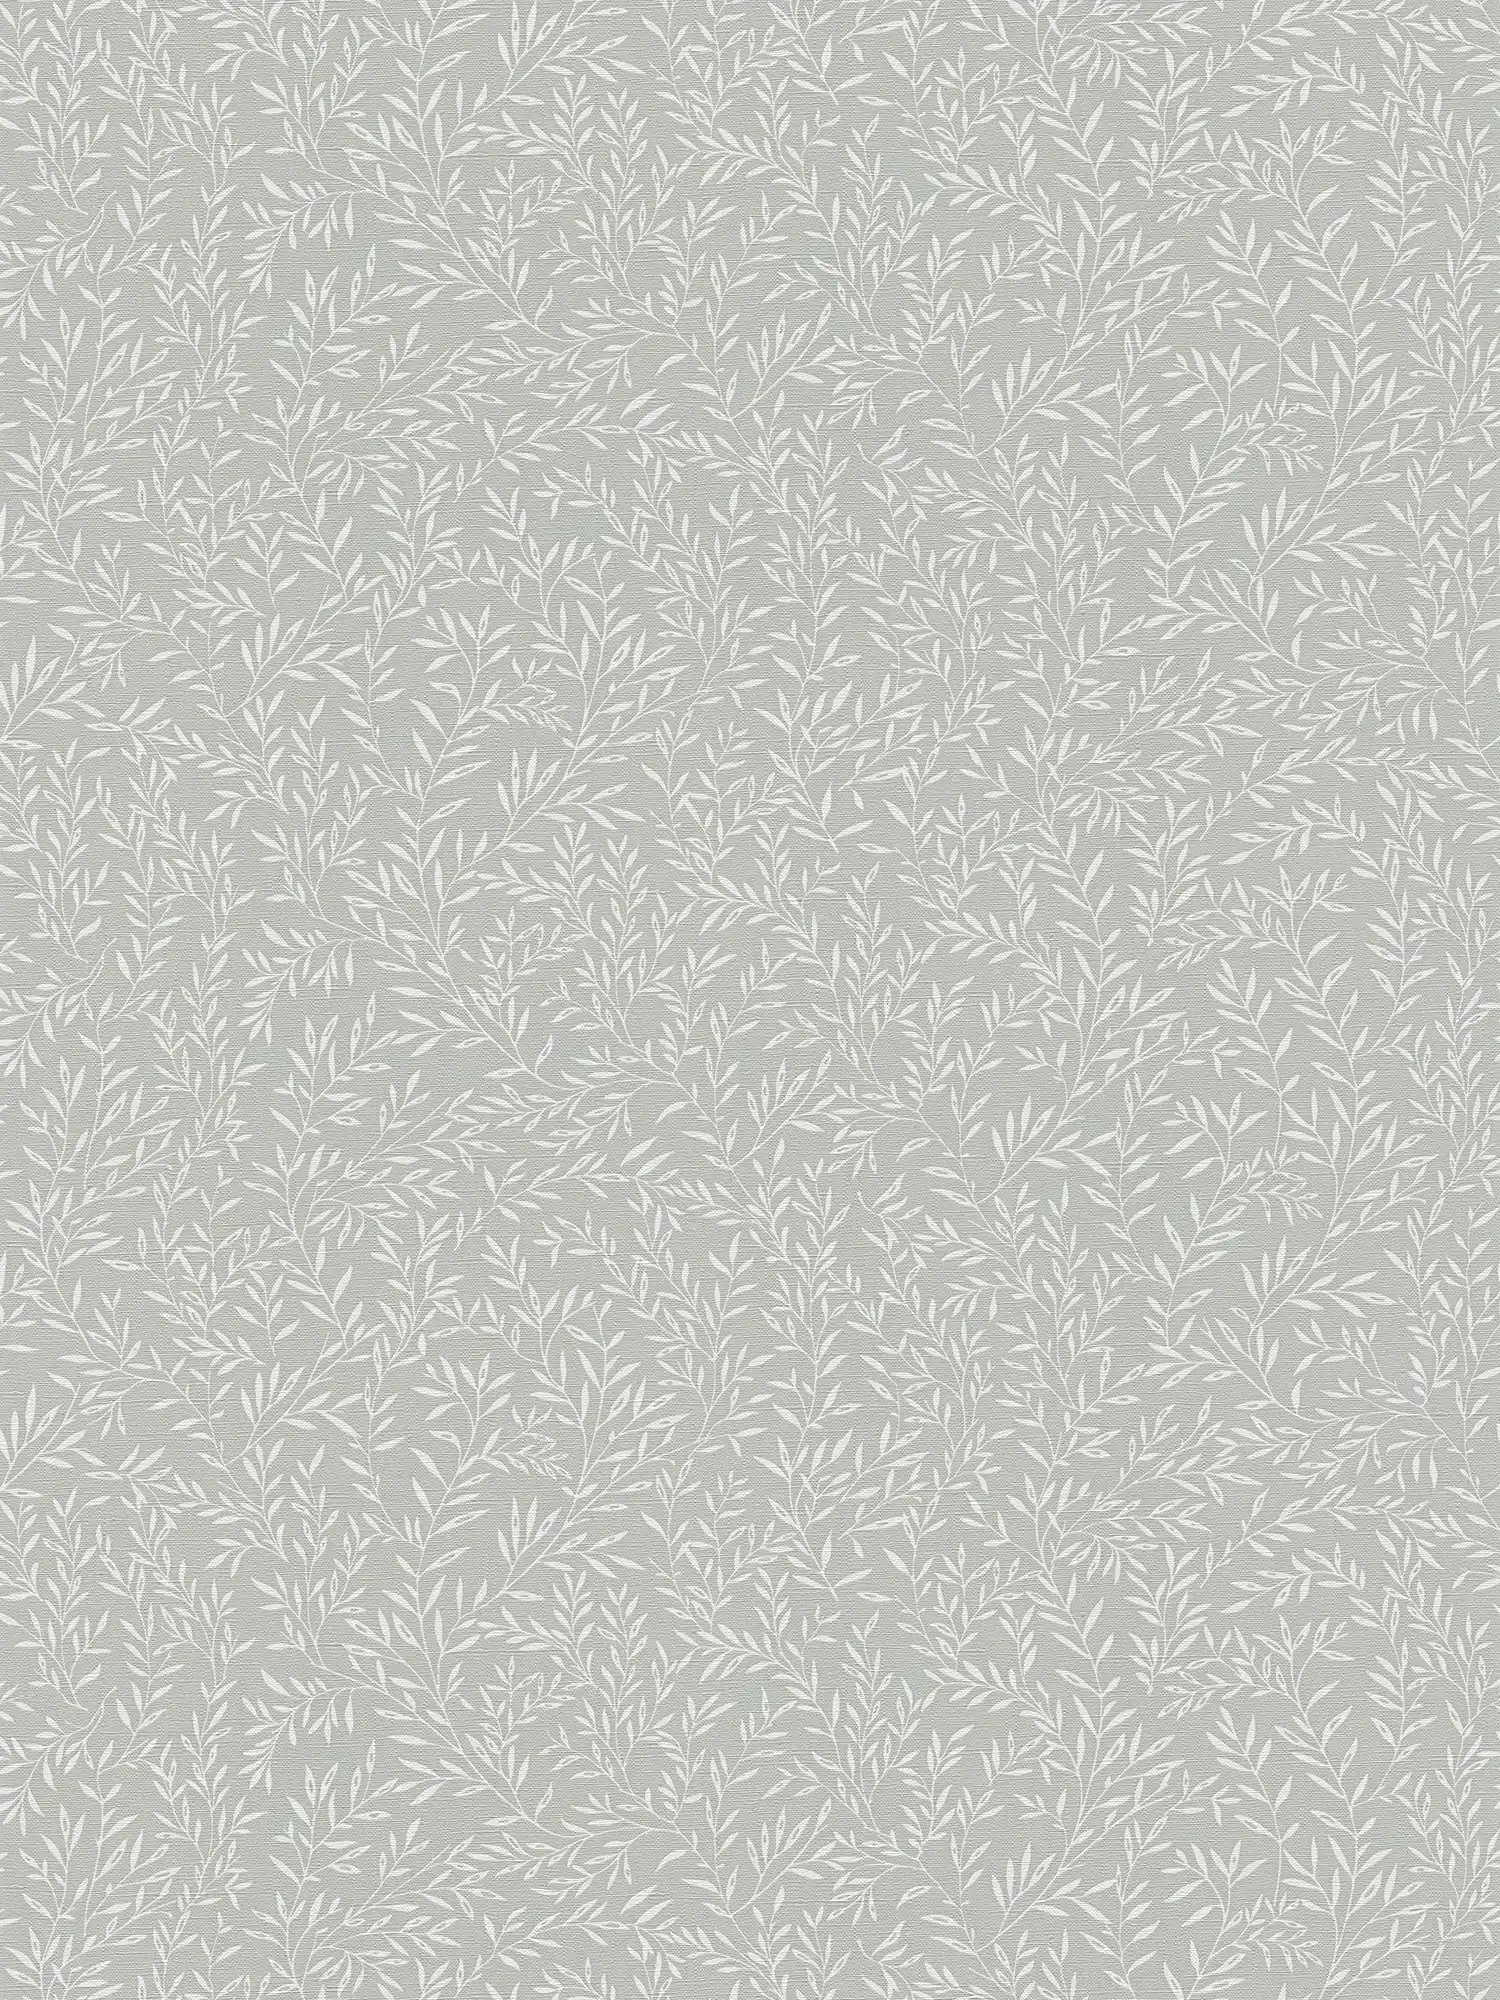 Wallpaper with leaf tendrils in country style - grey, white
